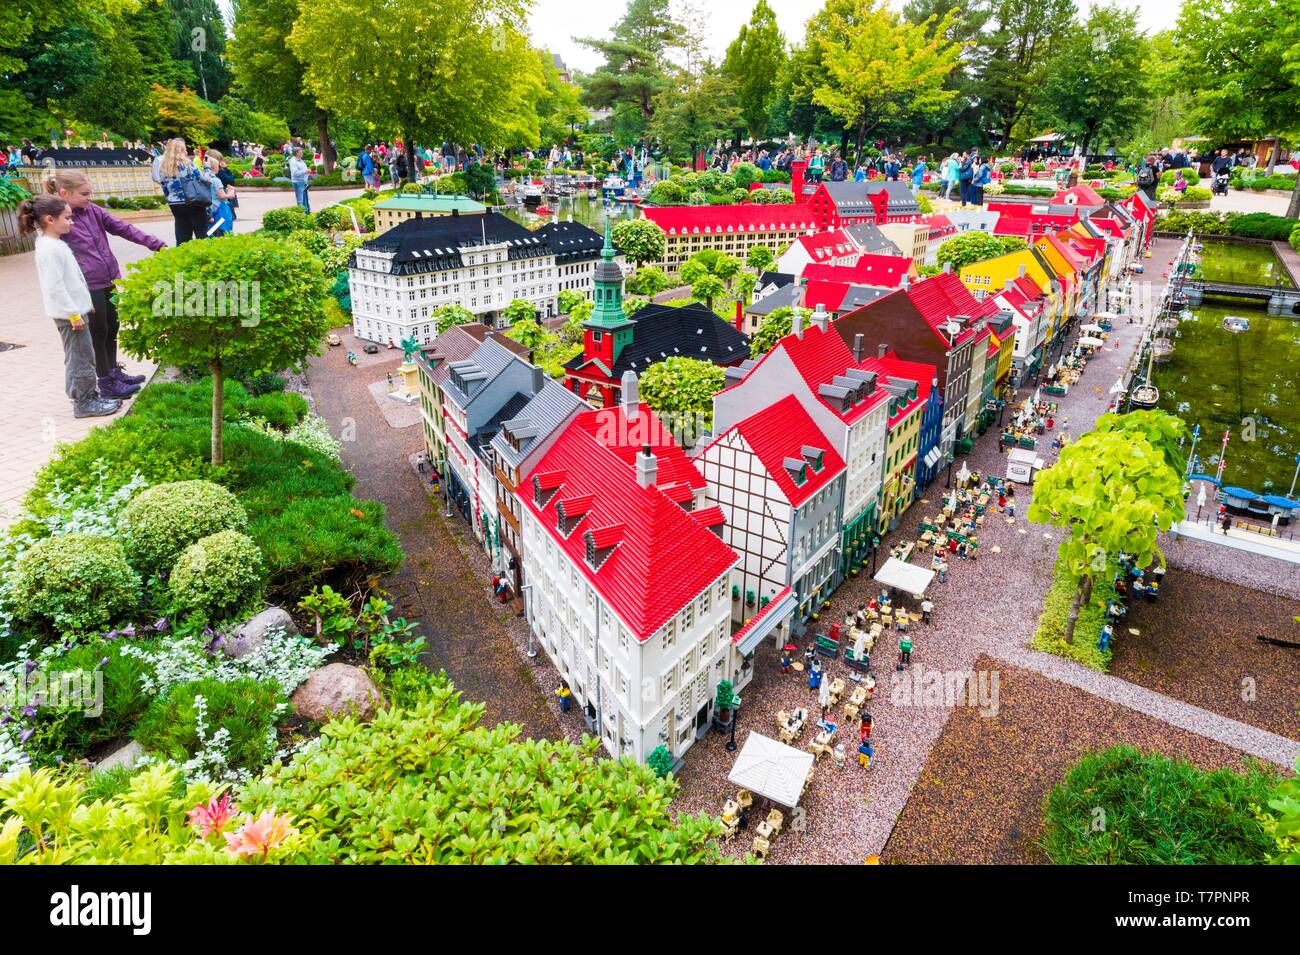 Denmark, Jutland, Billund, Legoland® Billund is the first Park established in 1968, near the headquarters of the Lego® company (the Lego is derived from the Danish Leg godt meaning plays